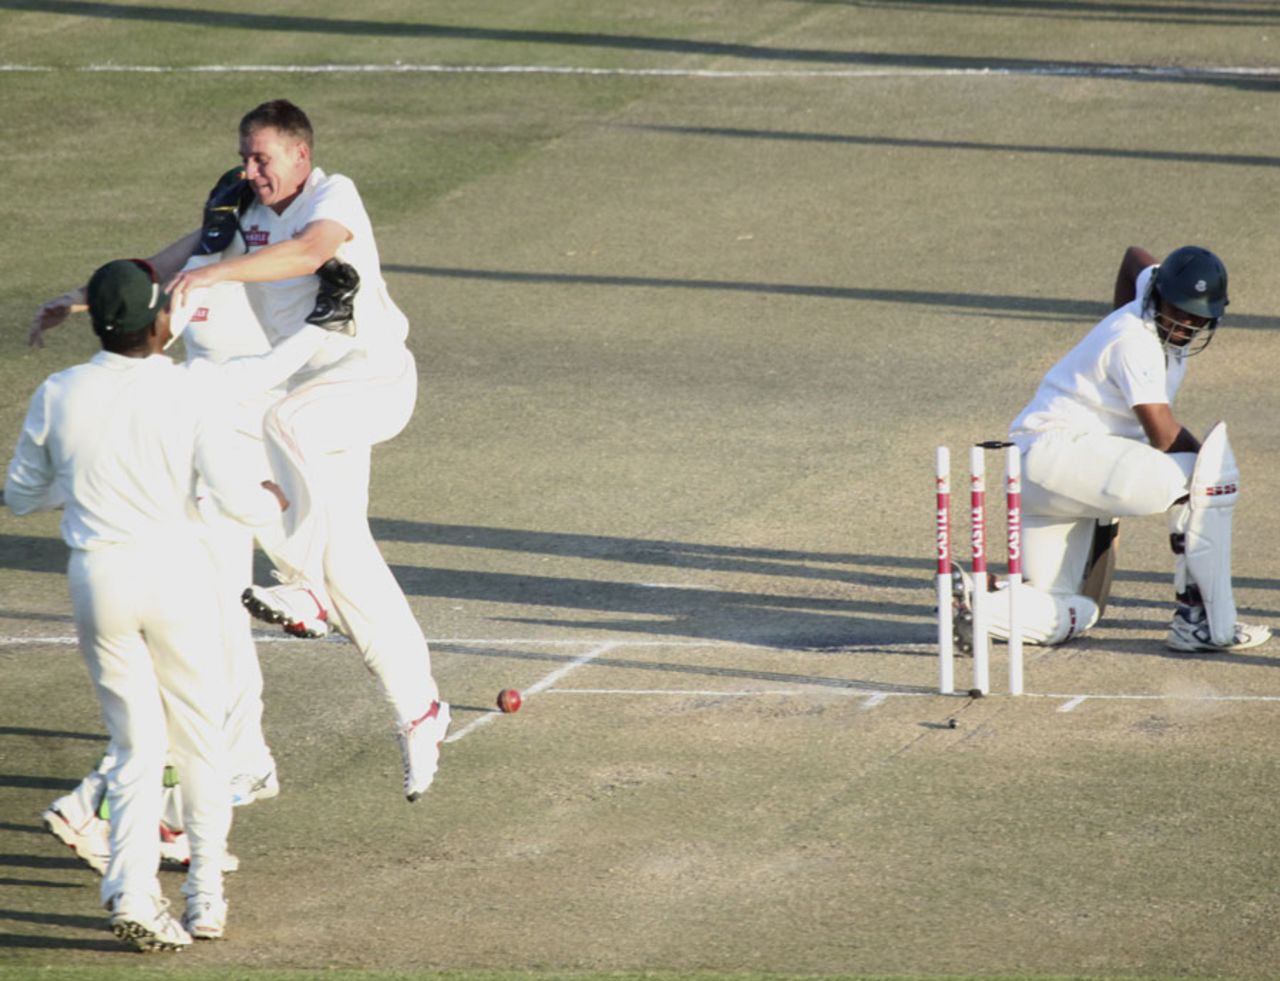 Ray Price celebrates the wicket of Shahriar Nafees, Bangladesh v Zimbabwe, only Test, Harare, 2nd day, August 5, 2011